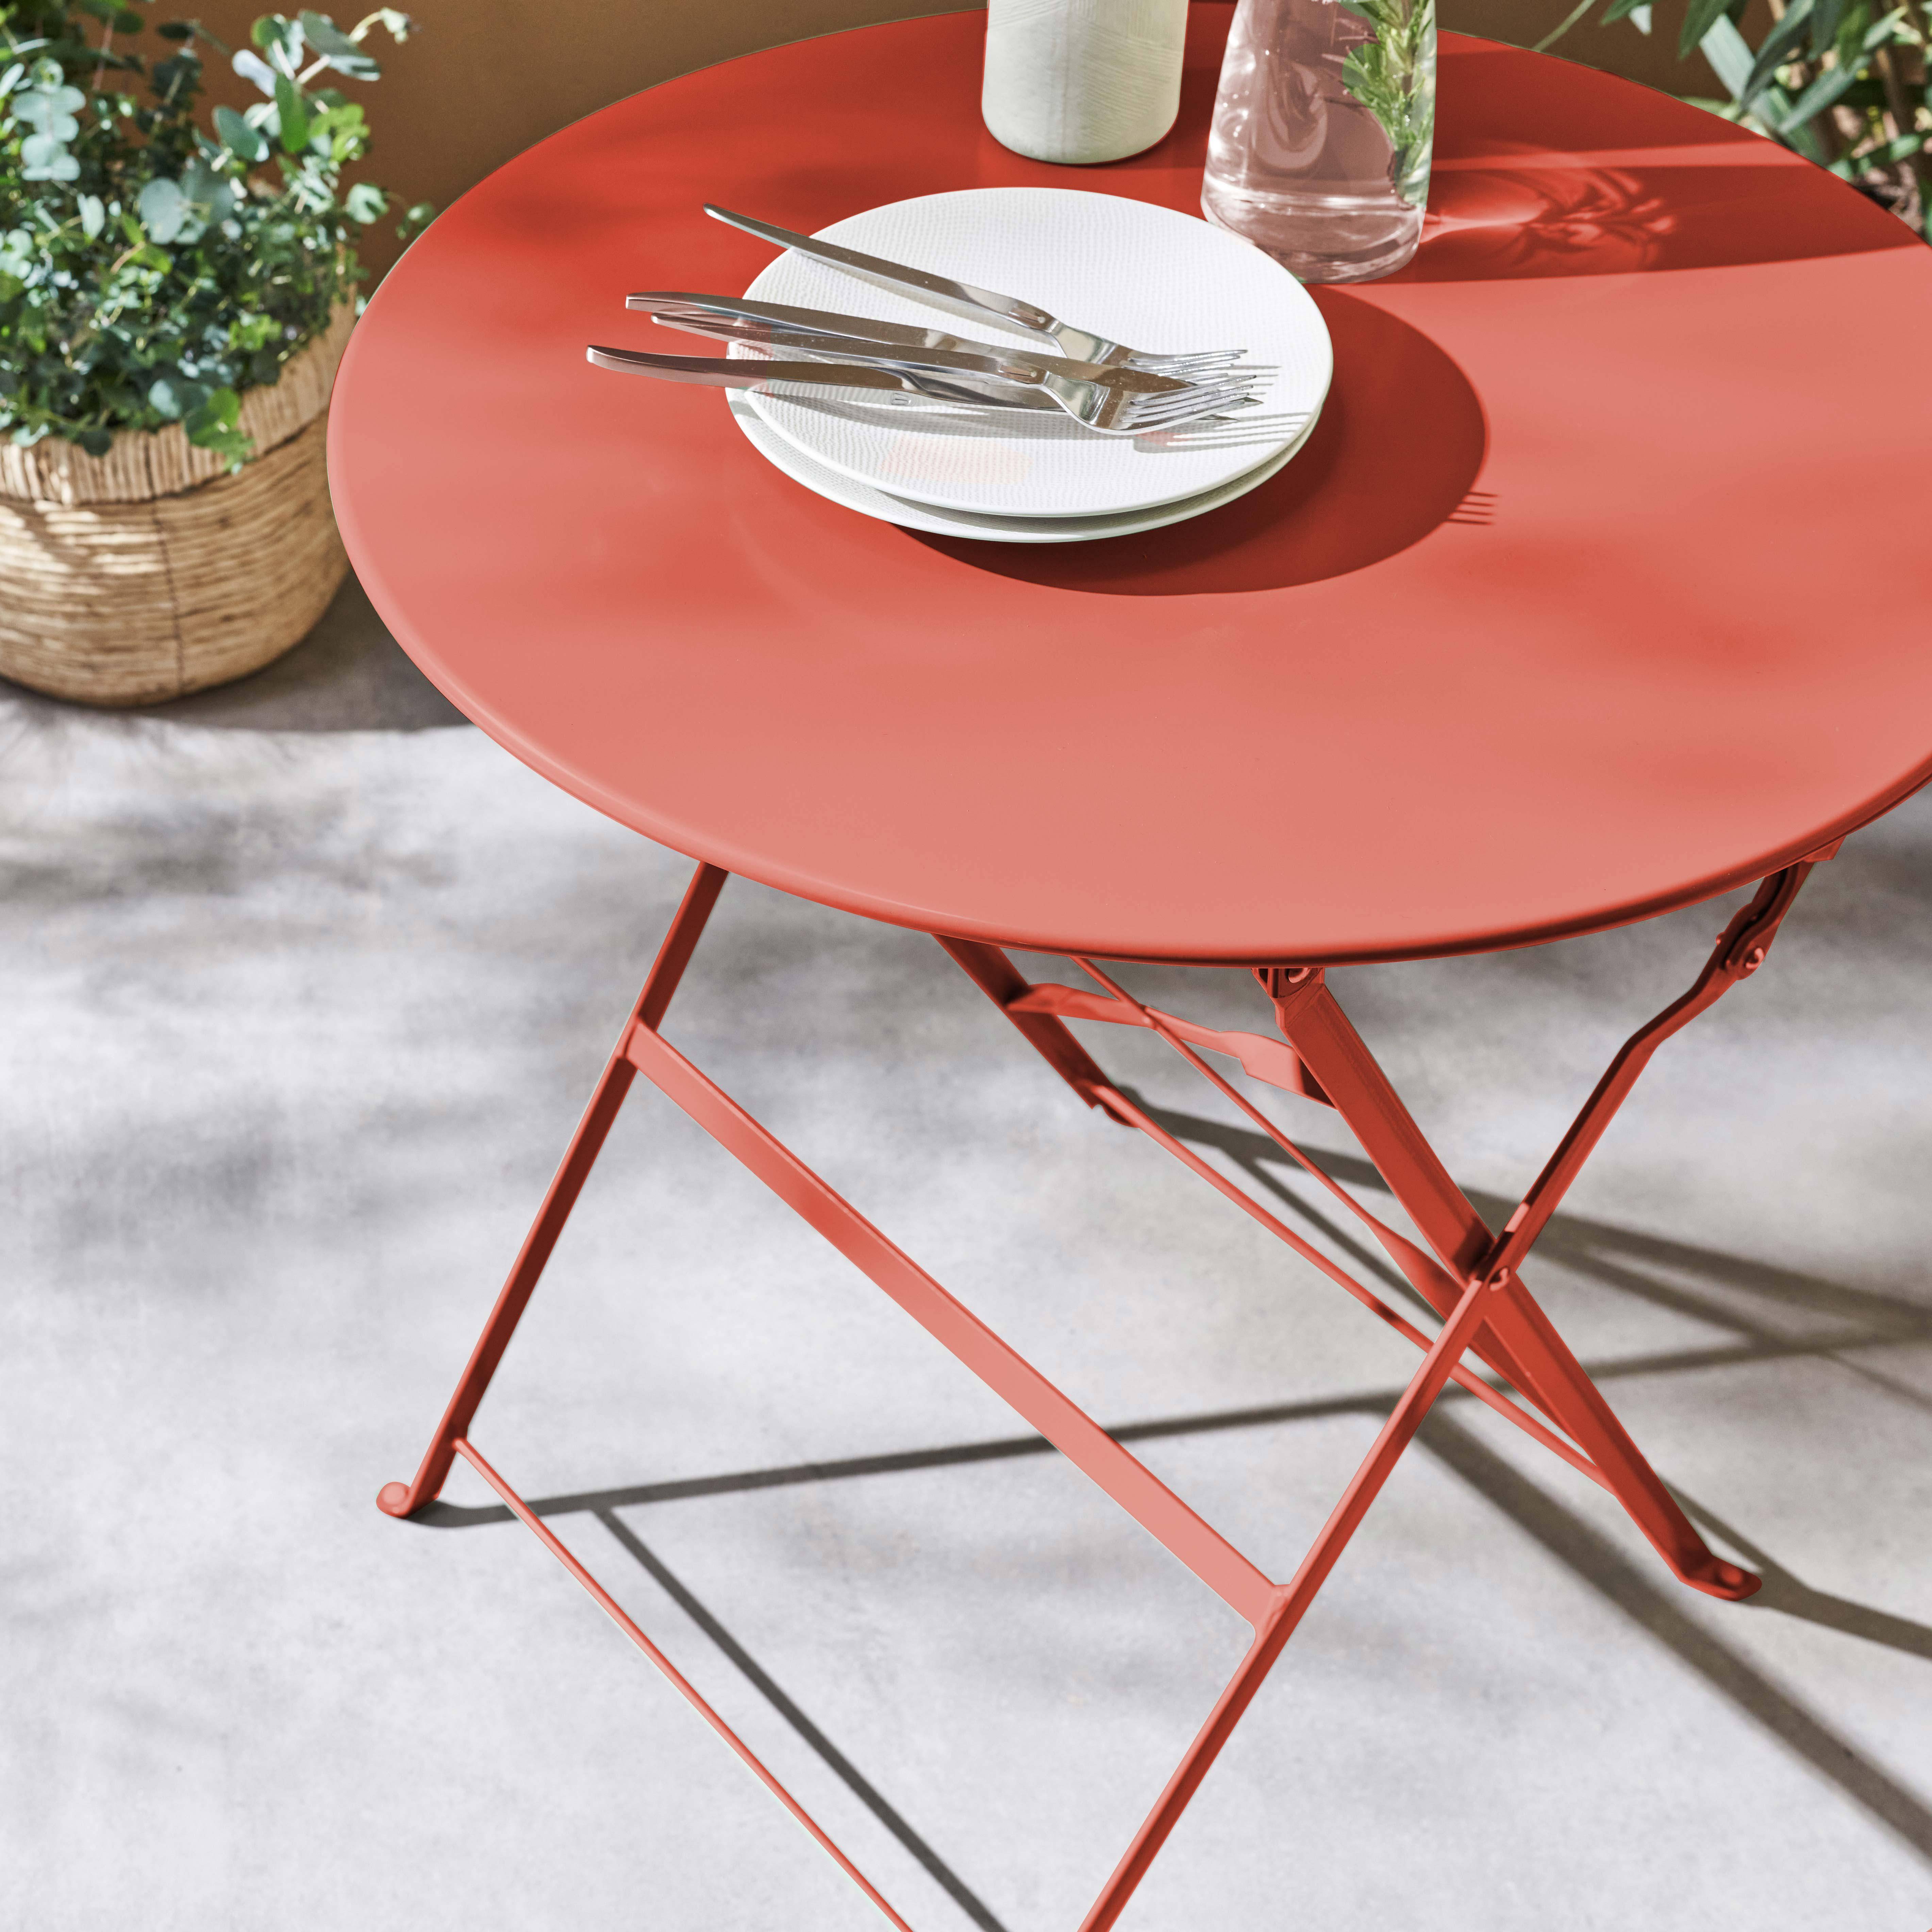 Foldable bistro garden table - Round Emilia terracota - Round table Ø60cm, thermo-lacquered steel,sweeek,Photo2